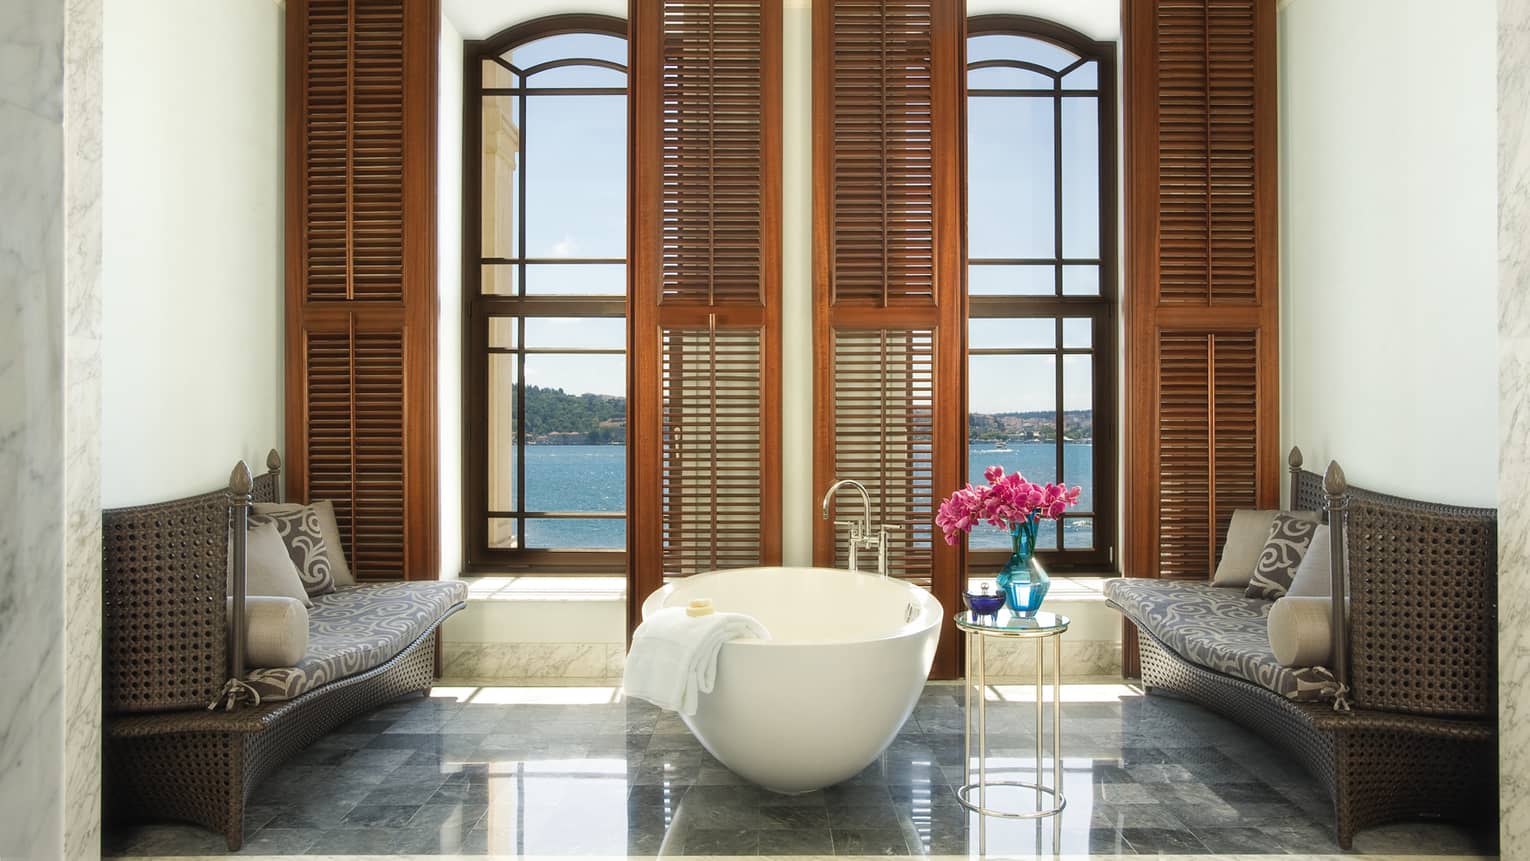 White freestanding tub in front of tall windows, wood shutters in marble bathroom